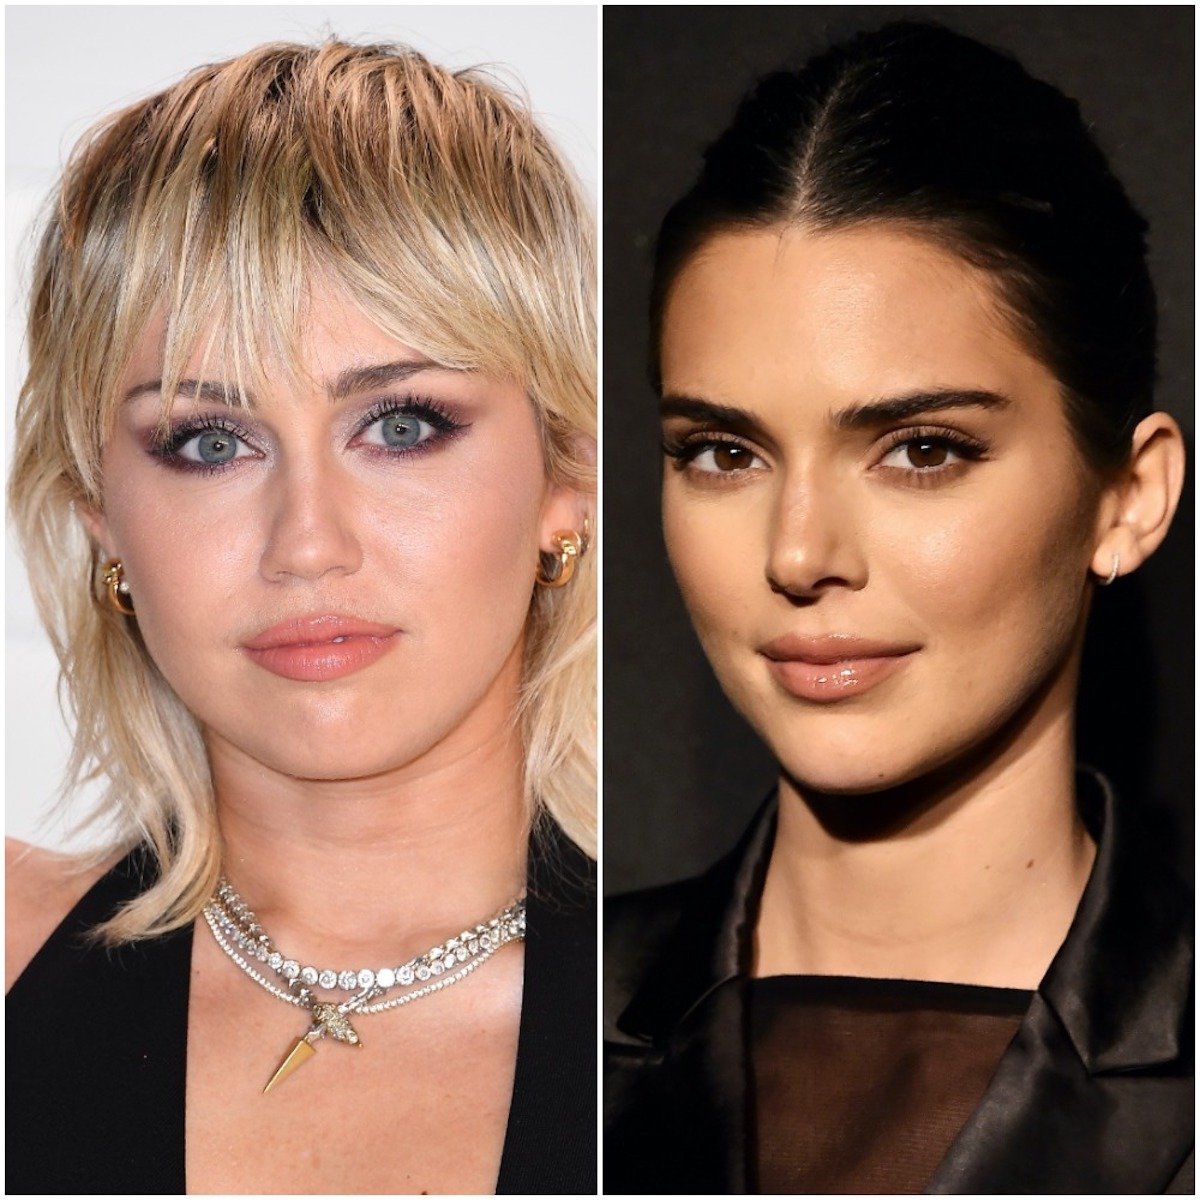 Miley Cyrus Sets the Record Straight on Rumors She Unfollowed Everyone Who Attended Kendall Jenner's Birthday Party